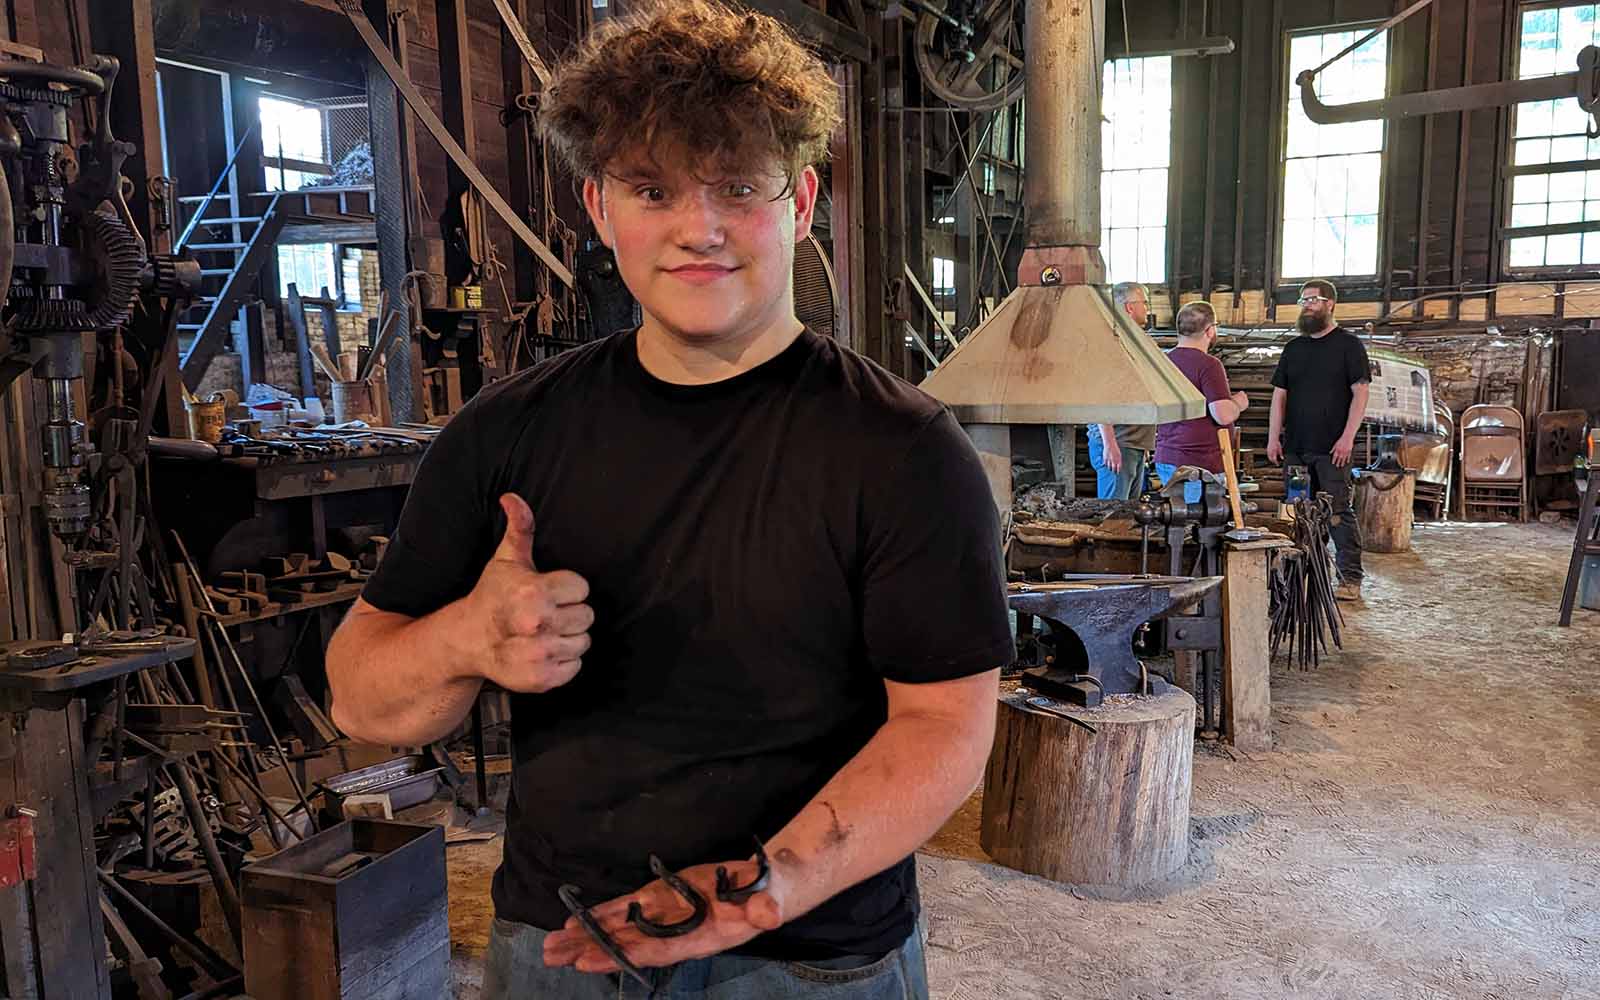 A young broad-shouldered man with a mop of curly hair gives a thumbs up with one hand and displays forged steelwork with the other.